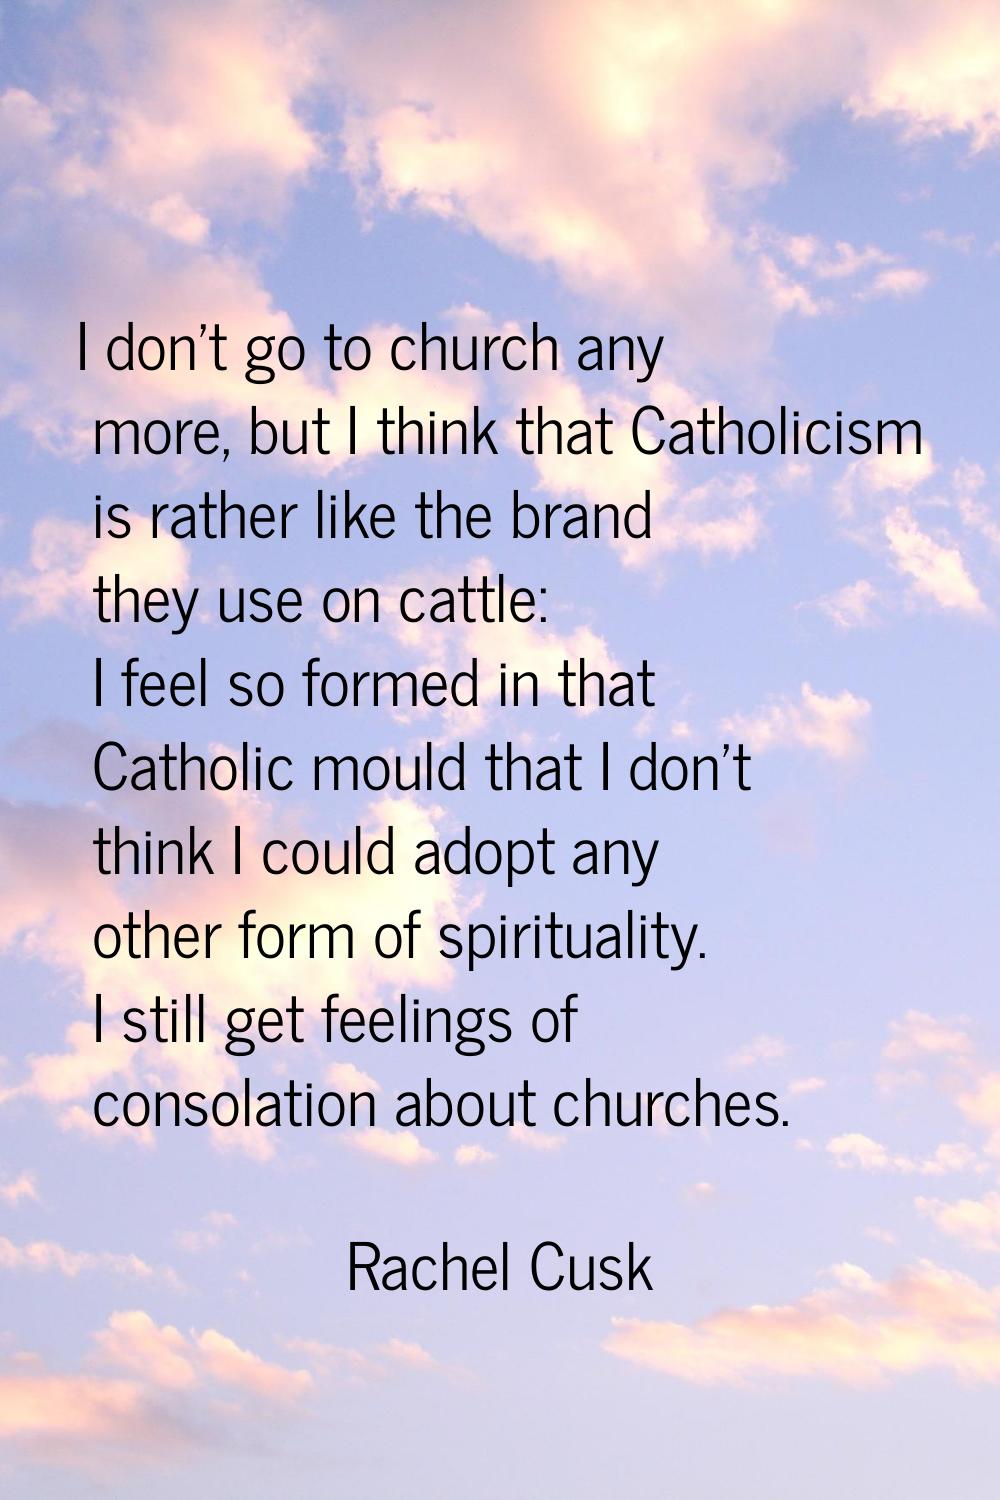 I don't go to church any more, but I think that Catholicism is rather like the brand they use on ca